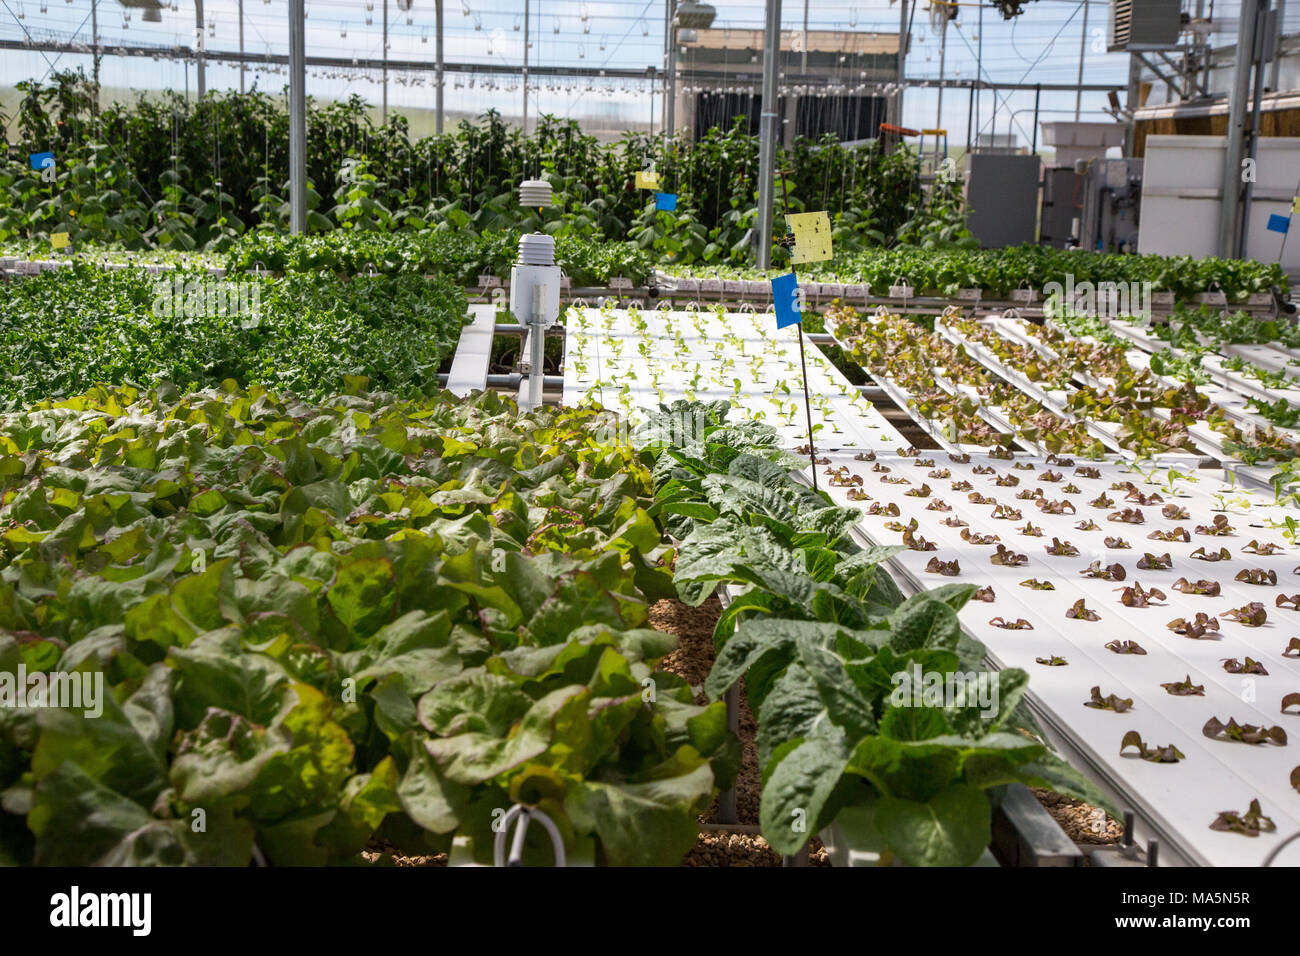 Hydroponic Agriculture.  Greenhouse Growing Lettuce, Cucumbers, Peppers.  Dyersville, Iowa, USA. Stock Photo